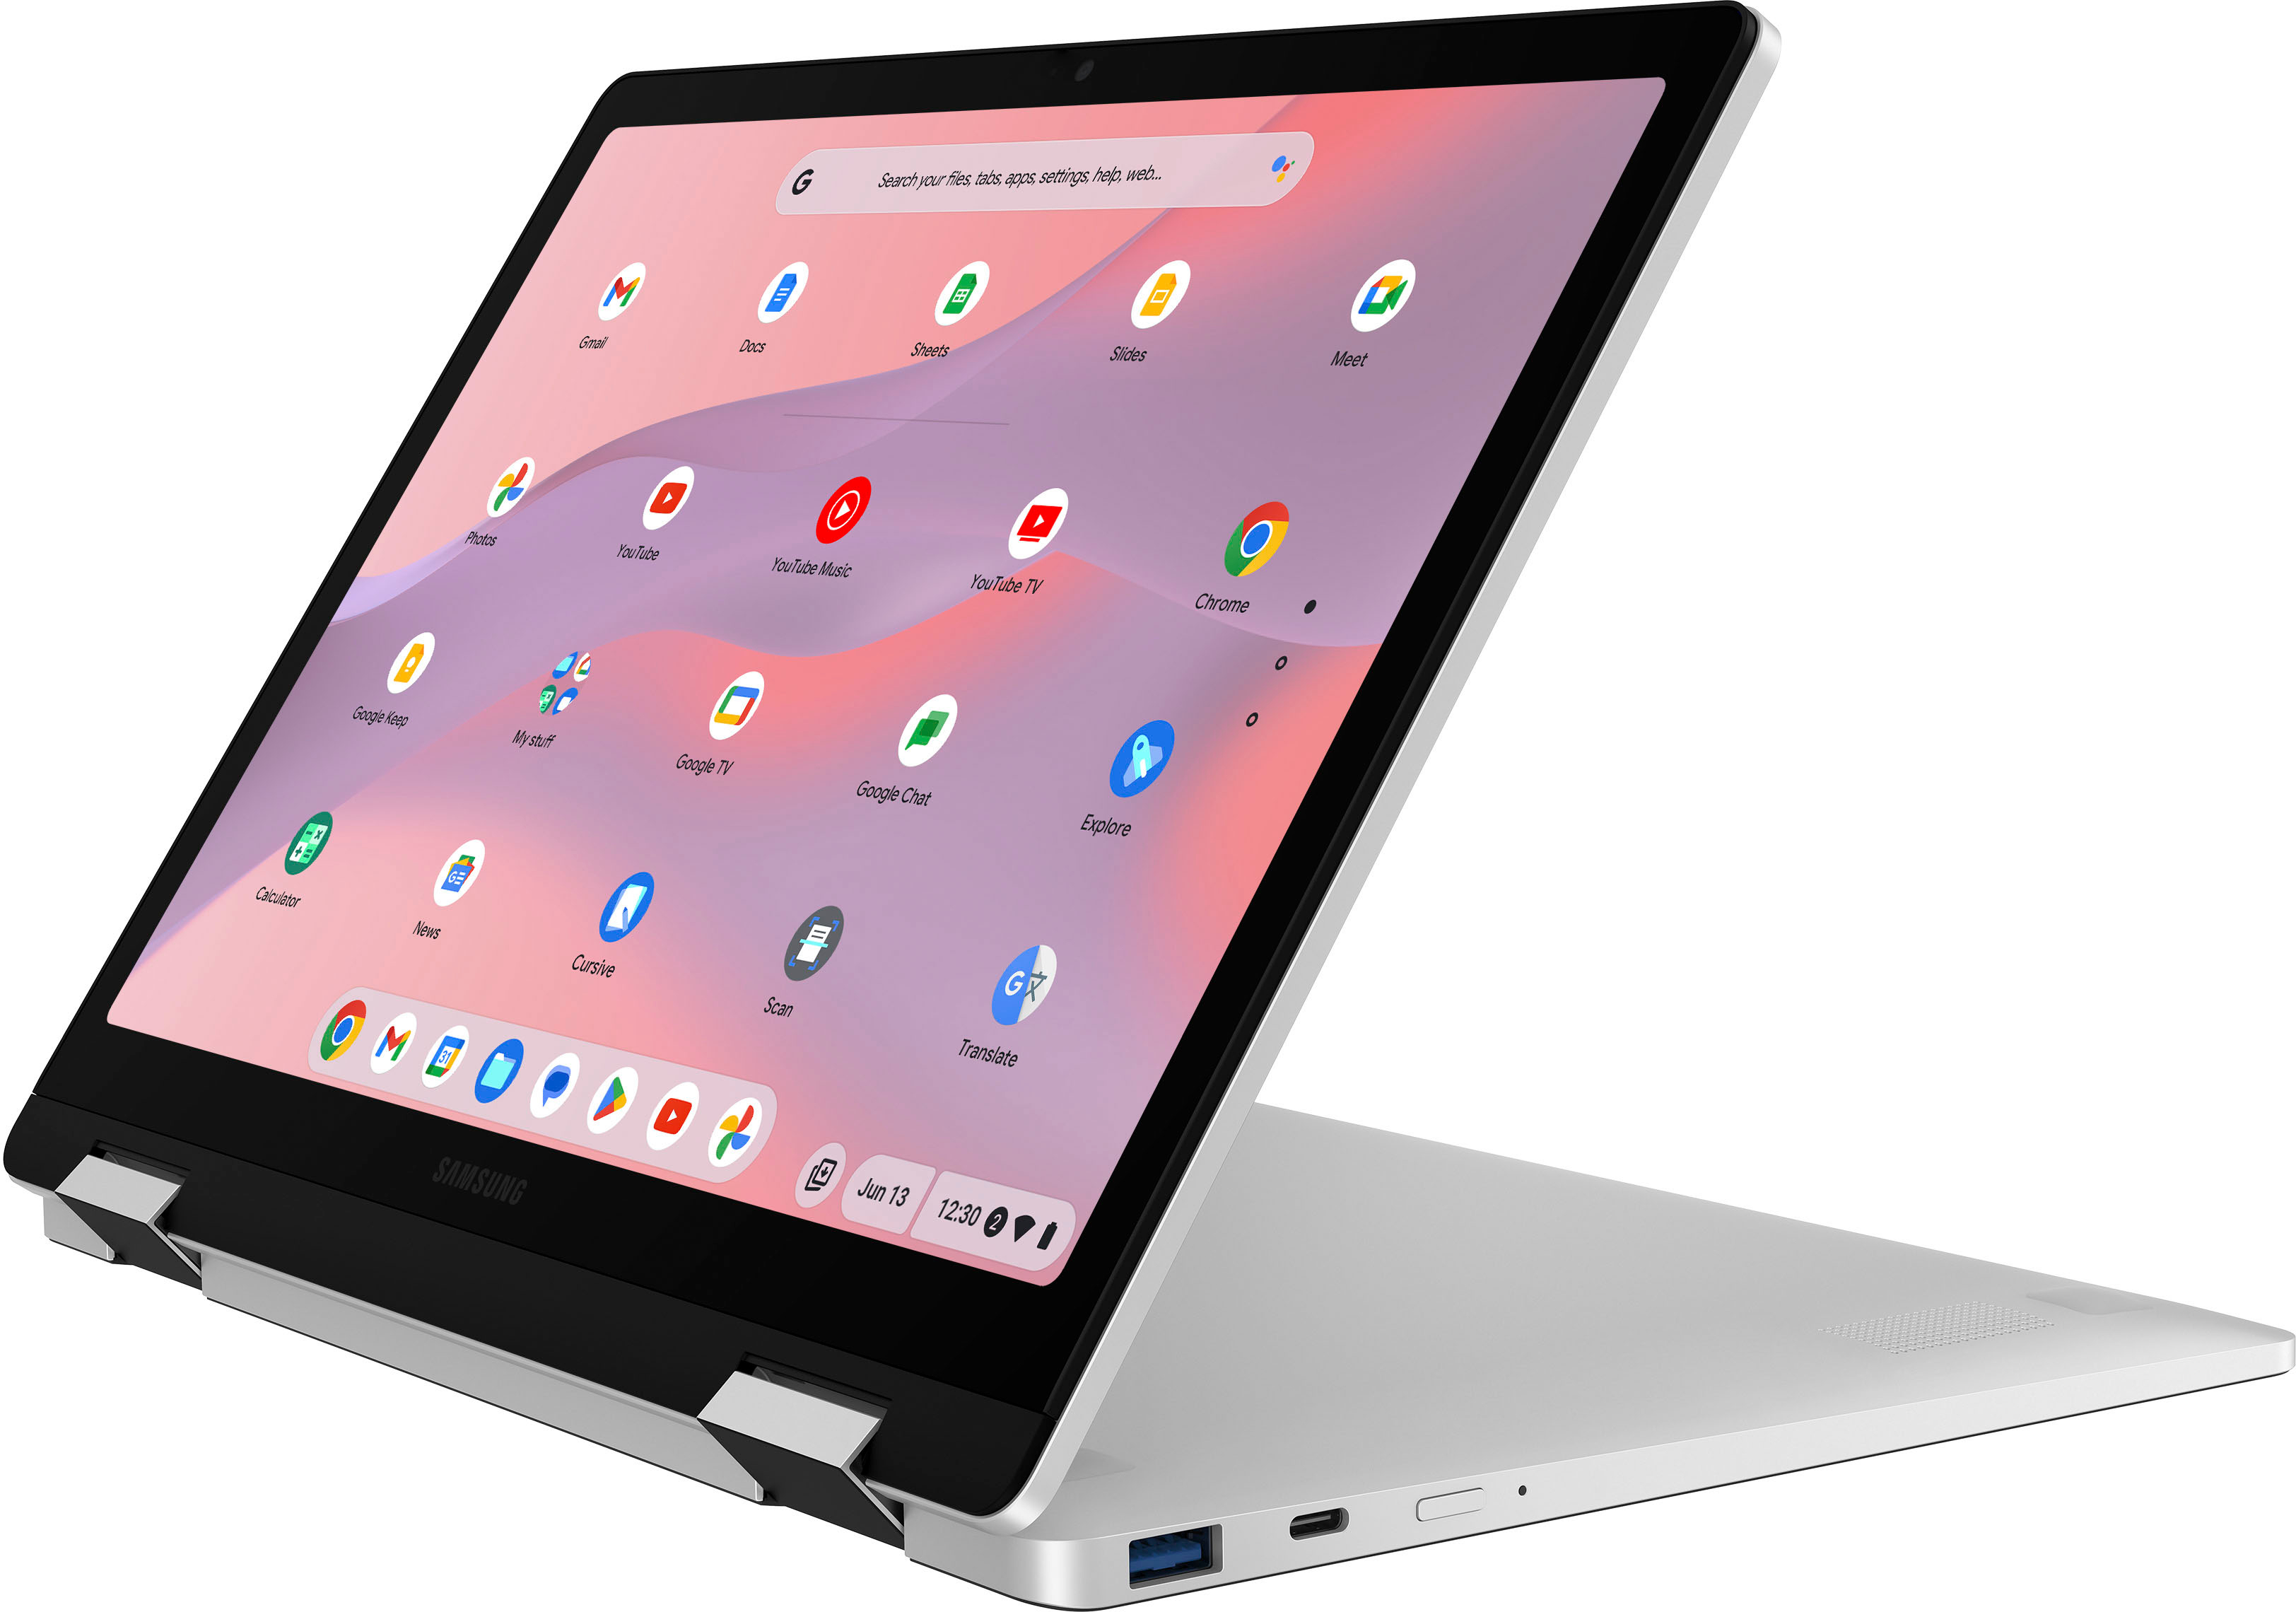 Galaxy Chromebook 2 360 LED 2-in-1 Touch Screen Laptop Celeron- 4GB Memory -Intel UHD Graphics- 128GB Silver - Best Buy